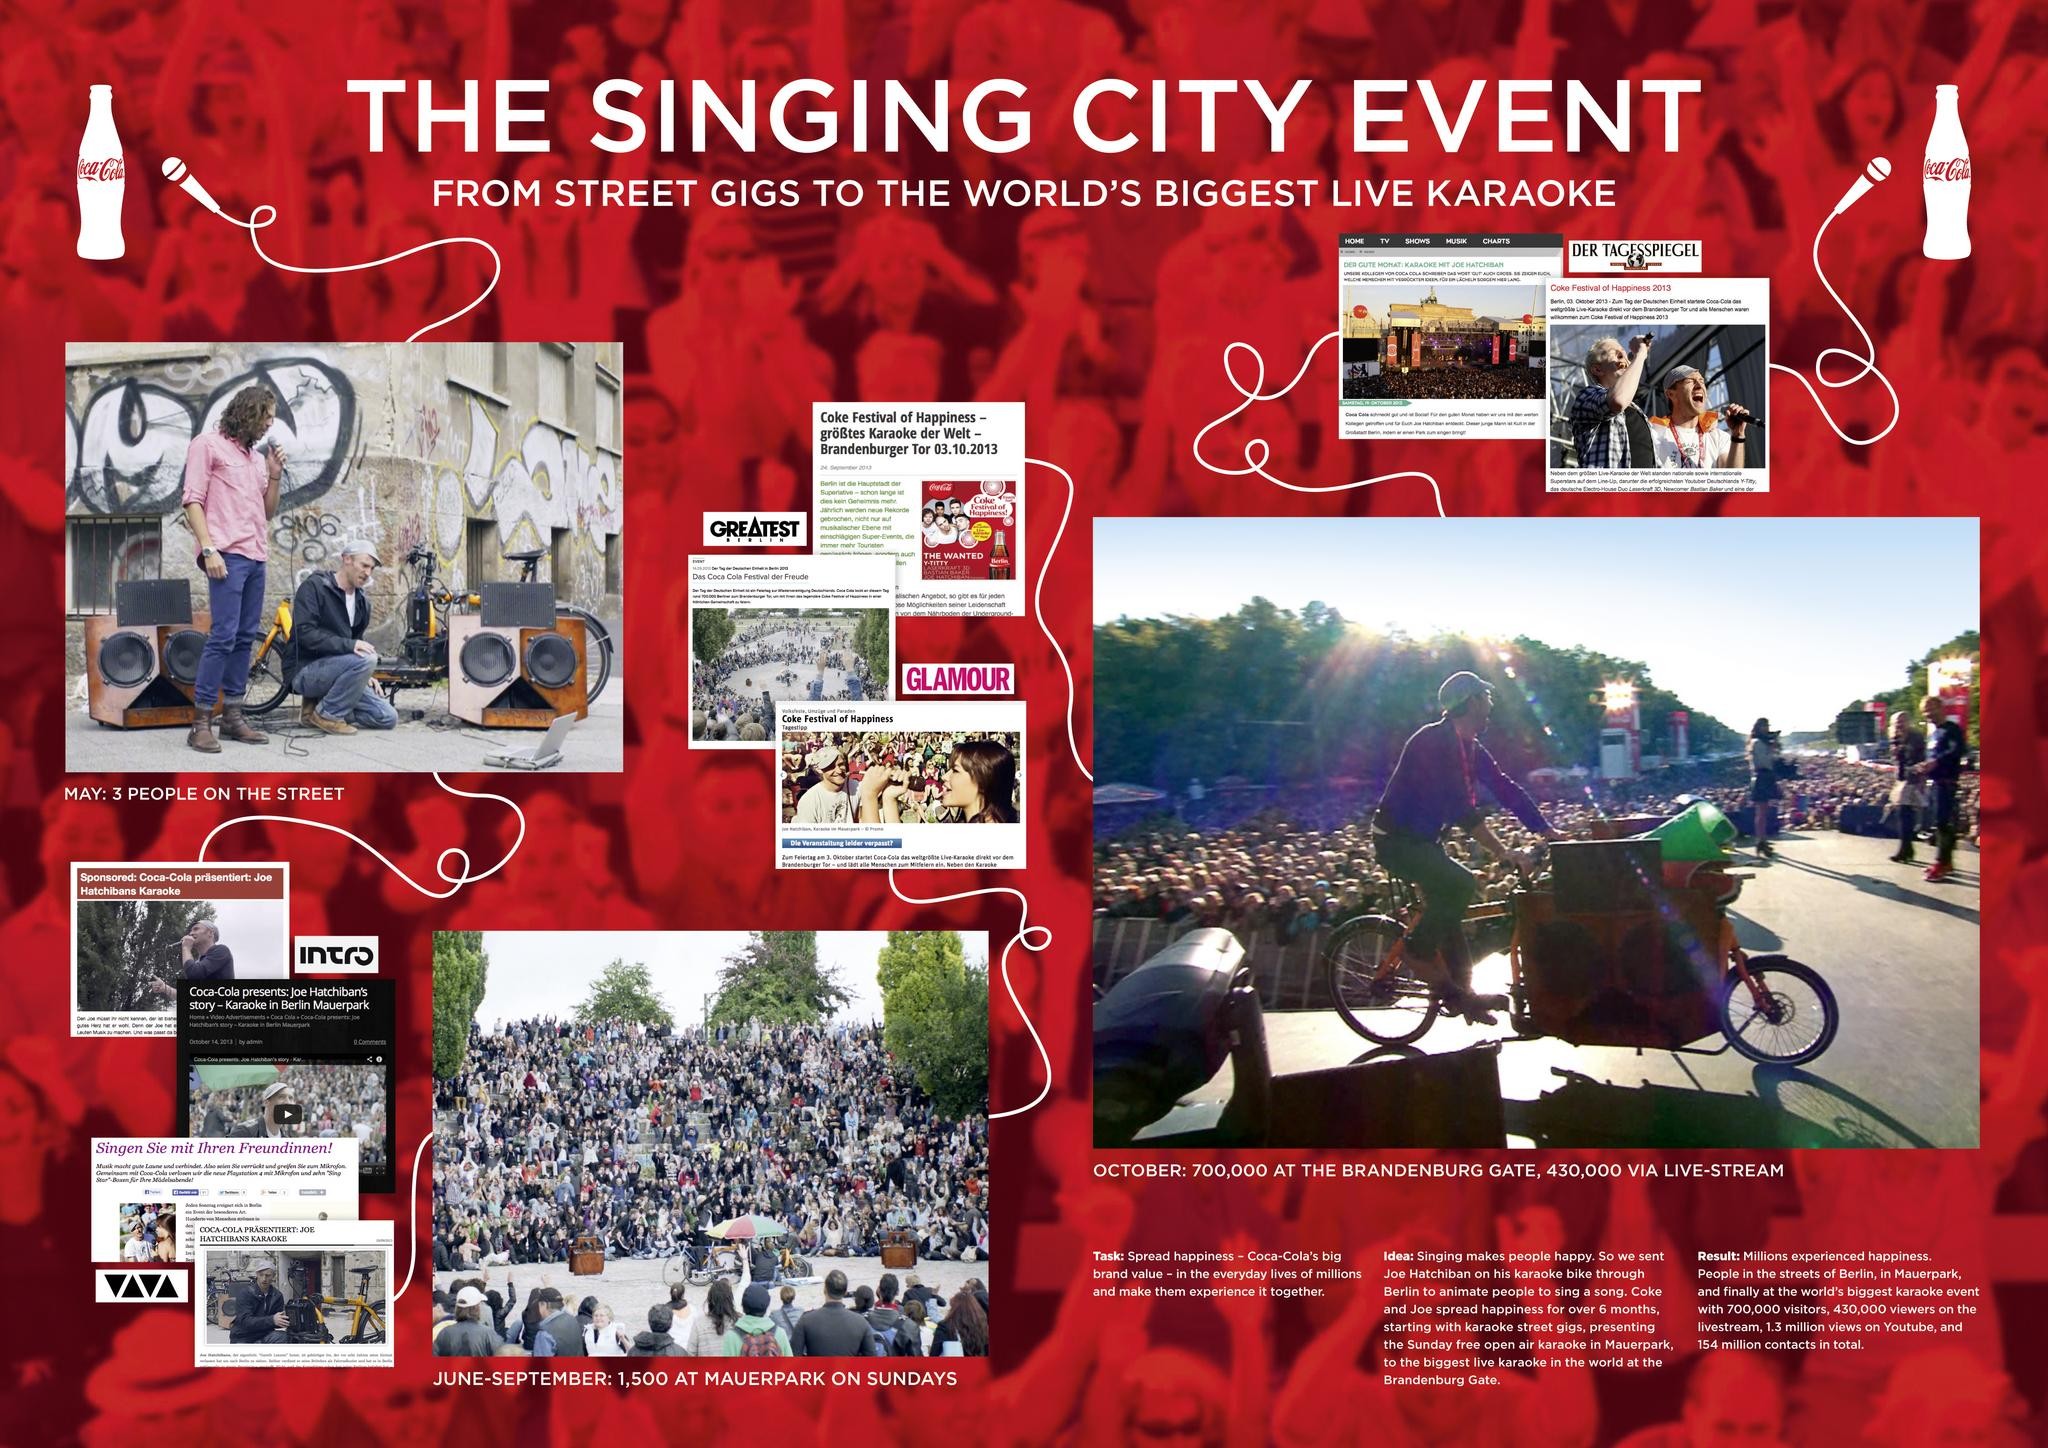 THE SINGING CITY PROJECT